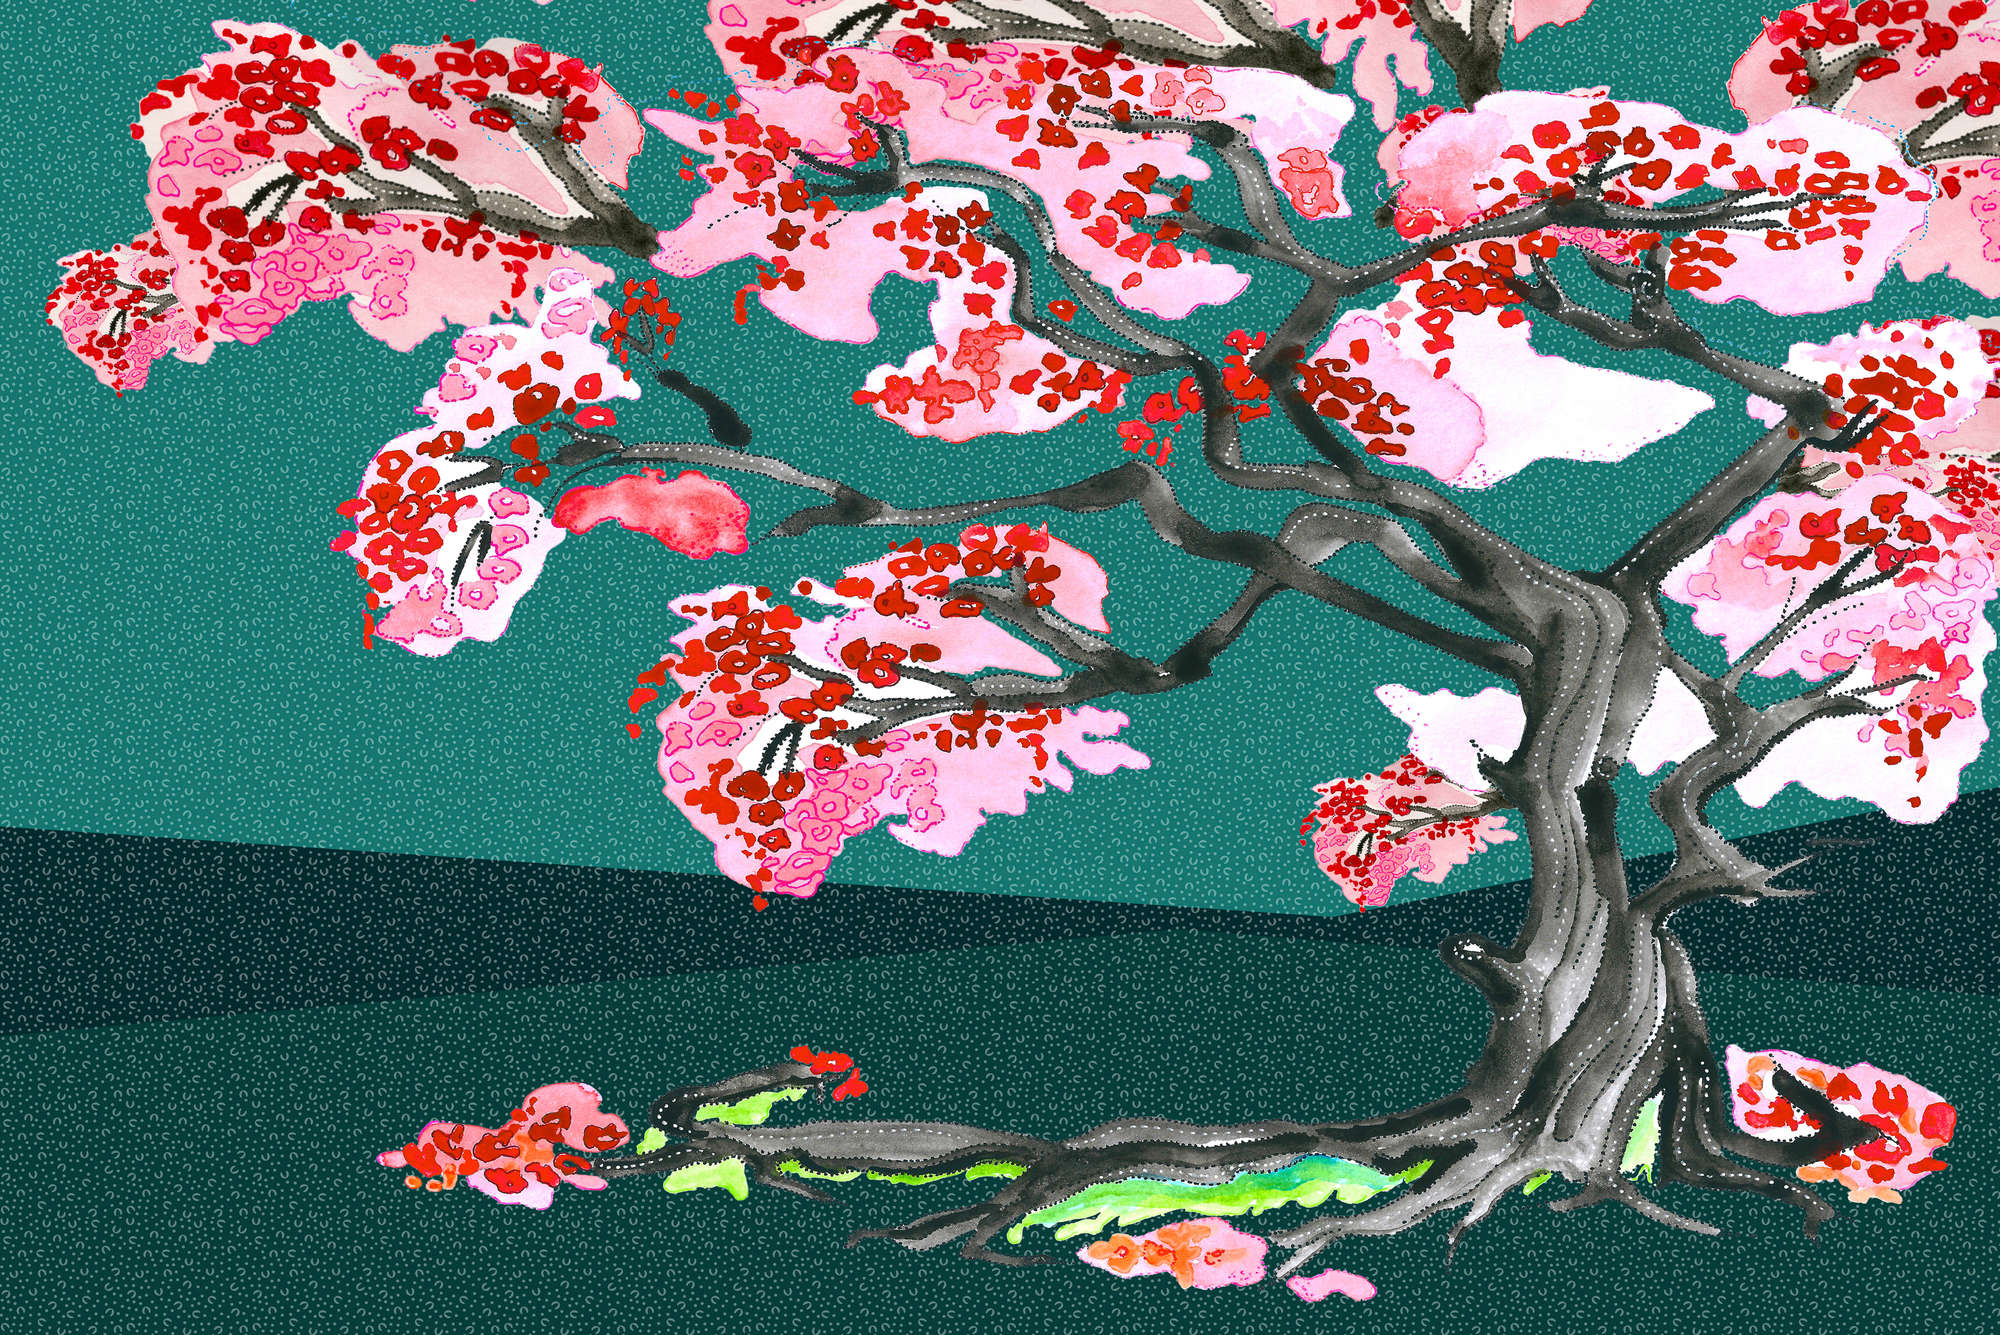             Cherry blossoms Asian comic style mural on matte smooth vinyl
        